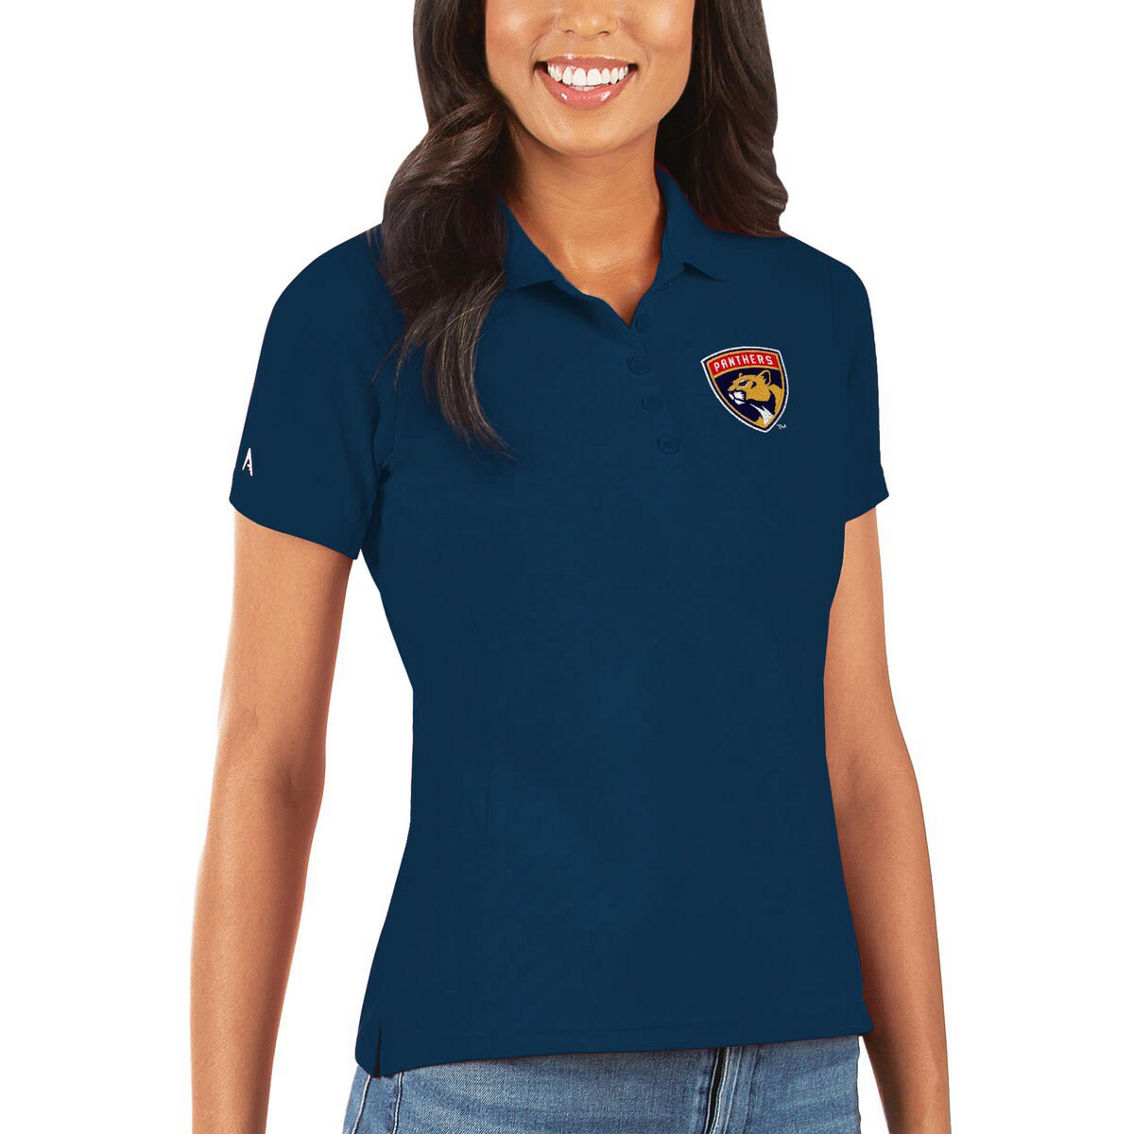 Antigua Women's Navy Florida Panthers Legacy Pique Polo - Image 2 of 2